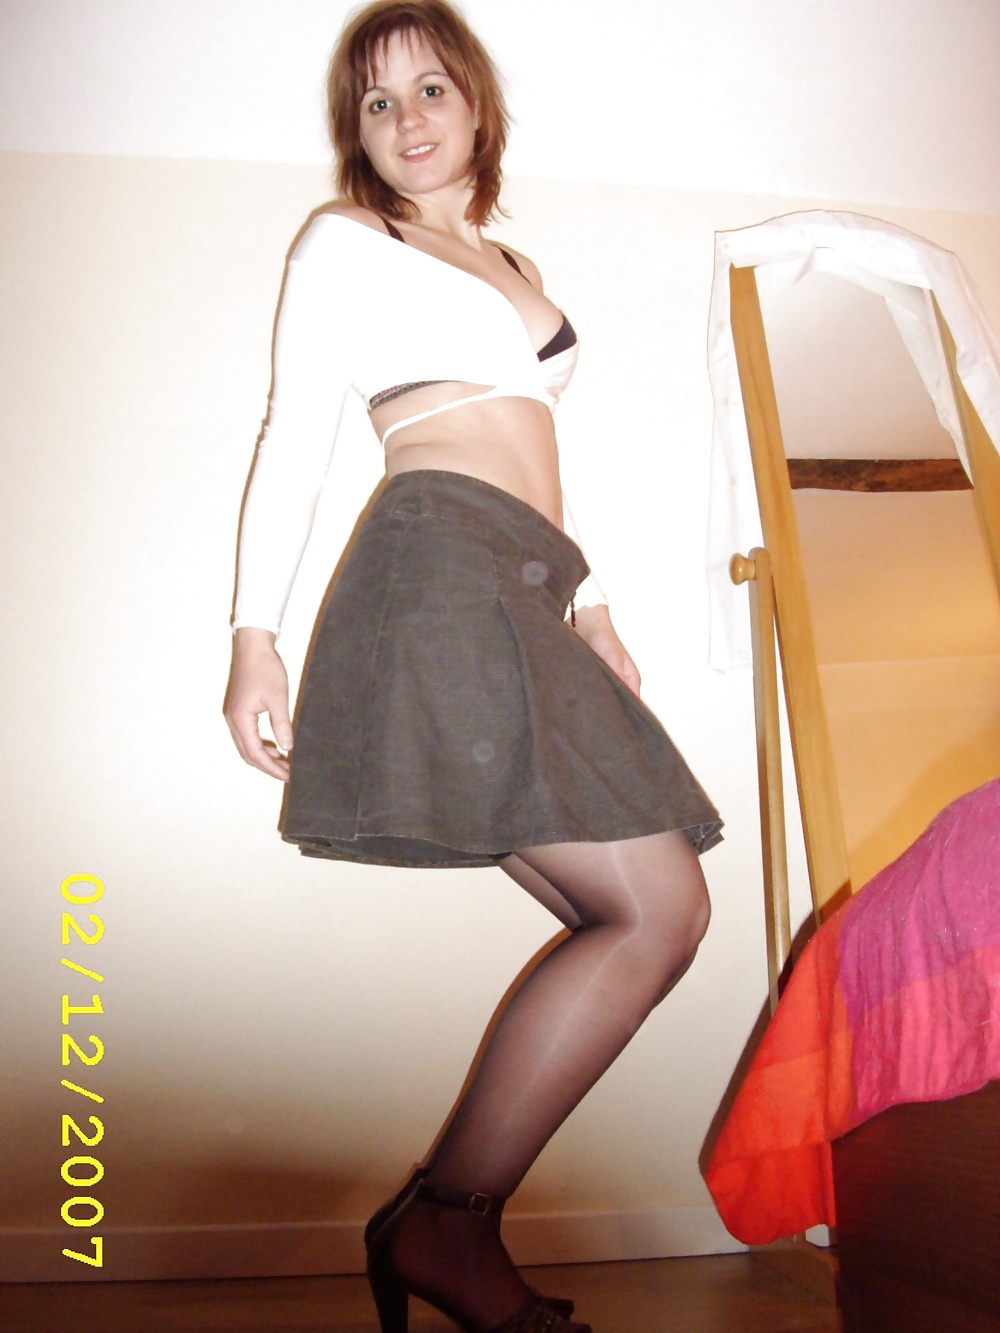 Hot pantyhose story 73 pict gal